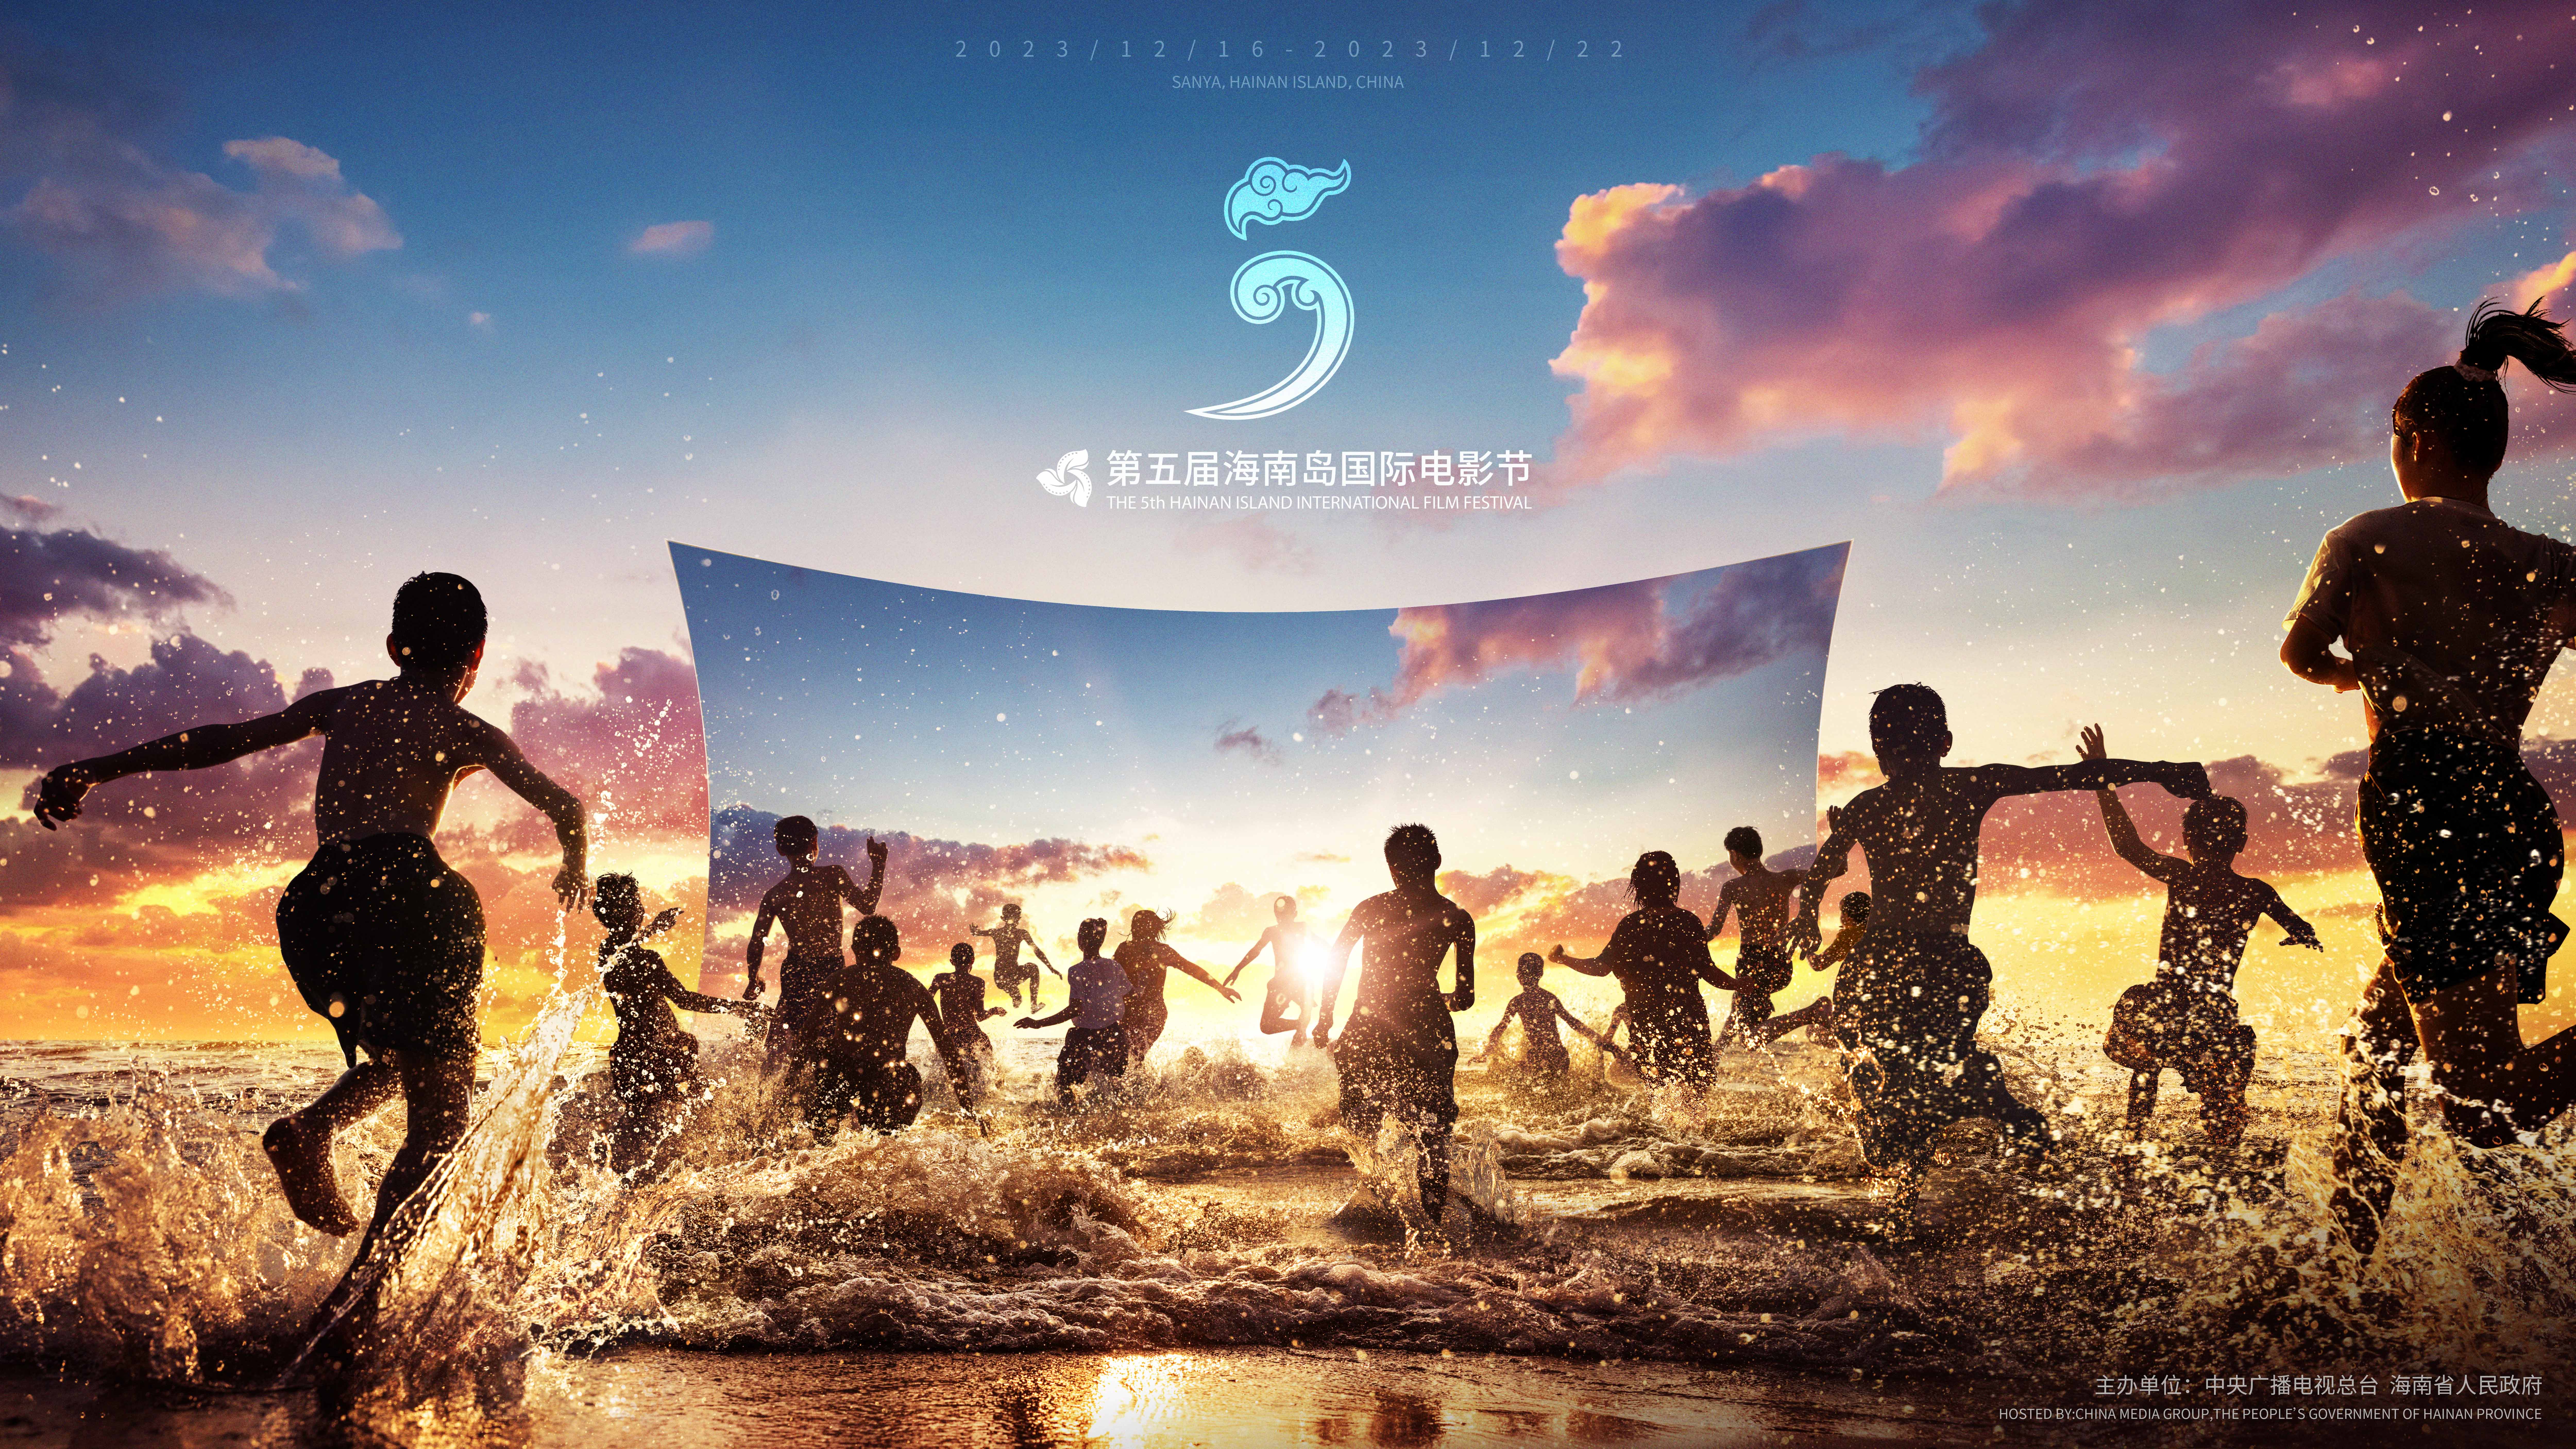 The 5th Hainan Island International Film Festival will be held from December 16 to 22 in Sanya